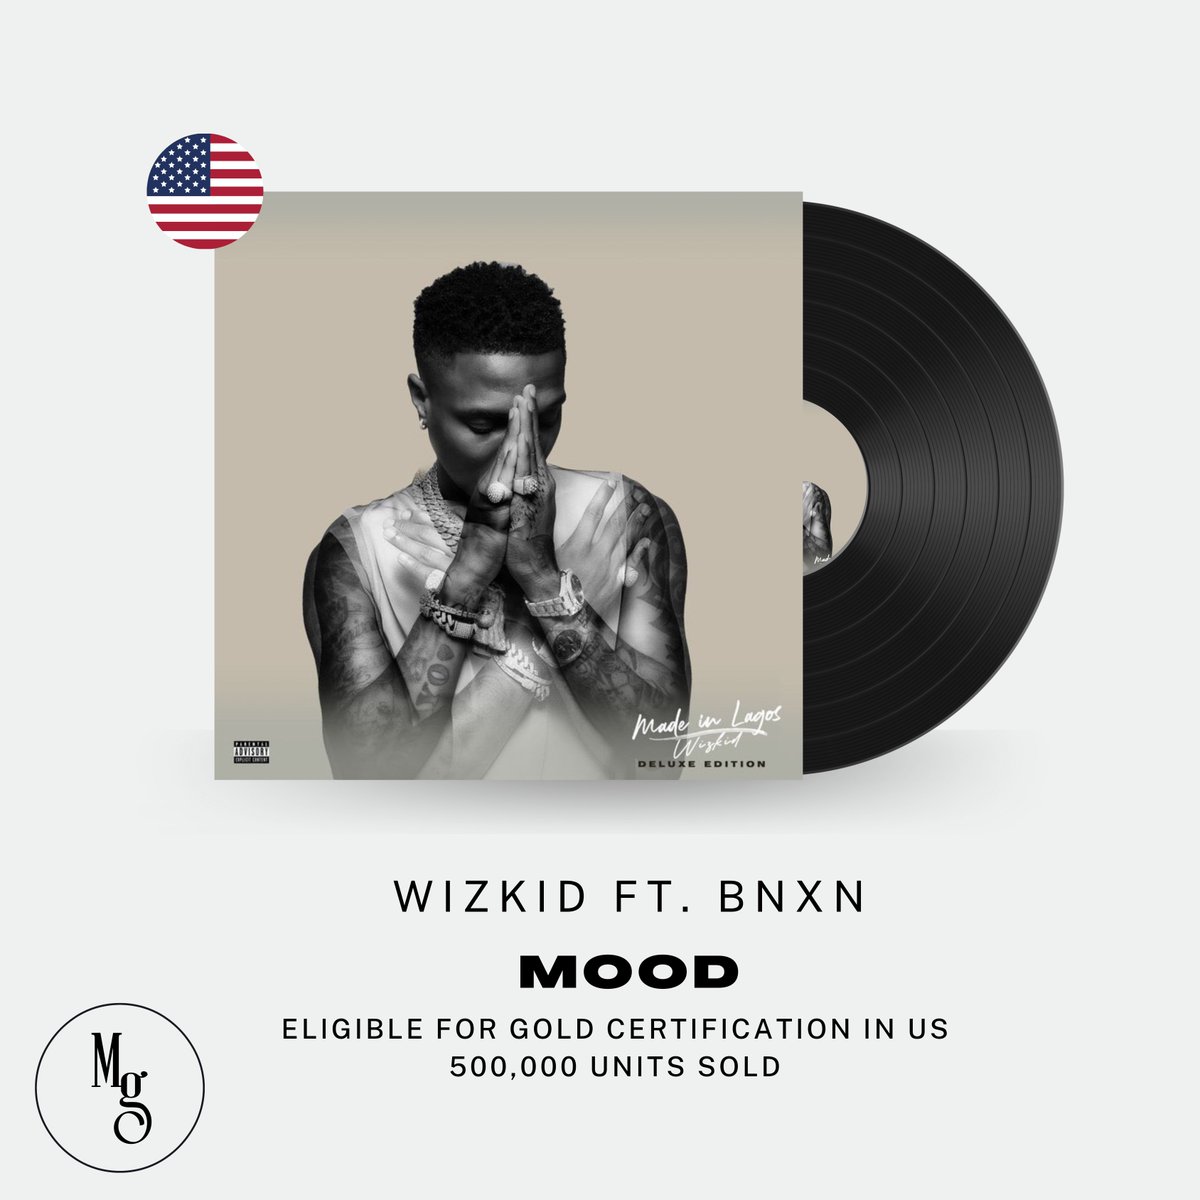 .@wizkidayo’s “Mood” (ft. @BNXN) has now sold 500,000 units in the US. — It is eligible for RIAA Gold Certification in the US.